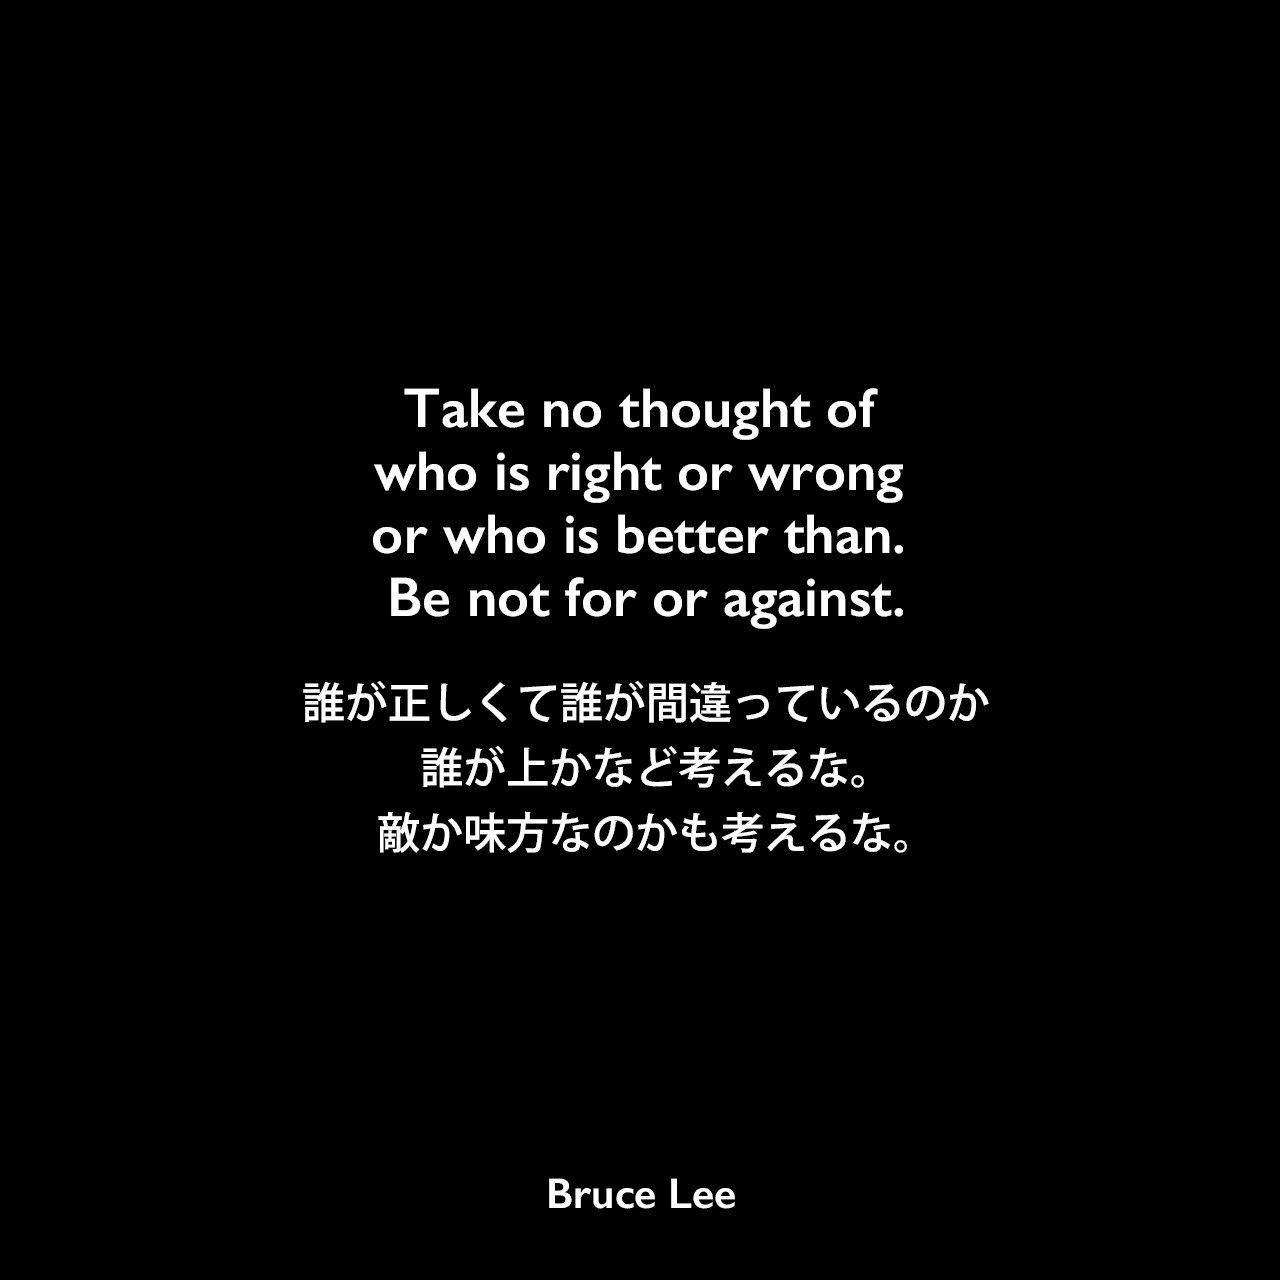 Take no thought of who is right or wrong or who is better than. Be not for or against.誰が正しくて誰が間違っているのか、誰が上かなど考えるな。敵か味方なのかも考えるな。Bruce Lee